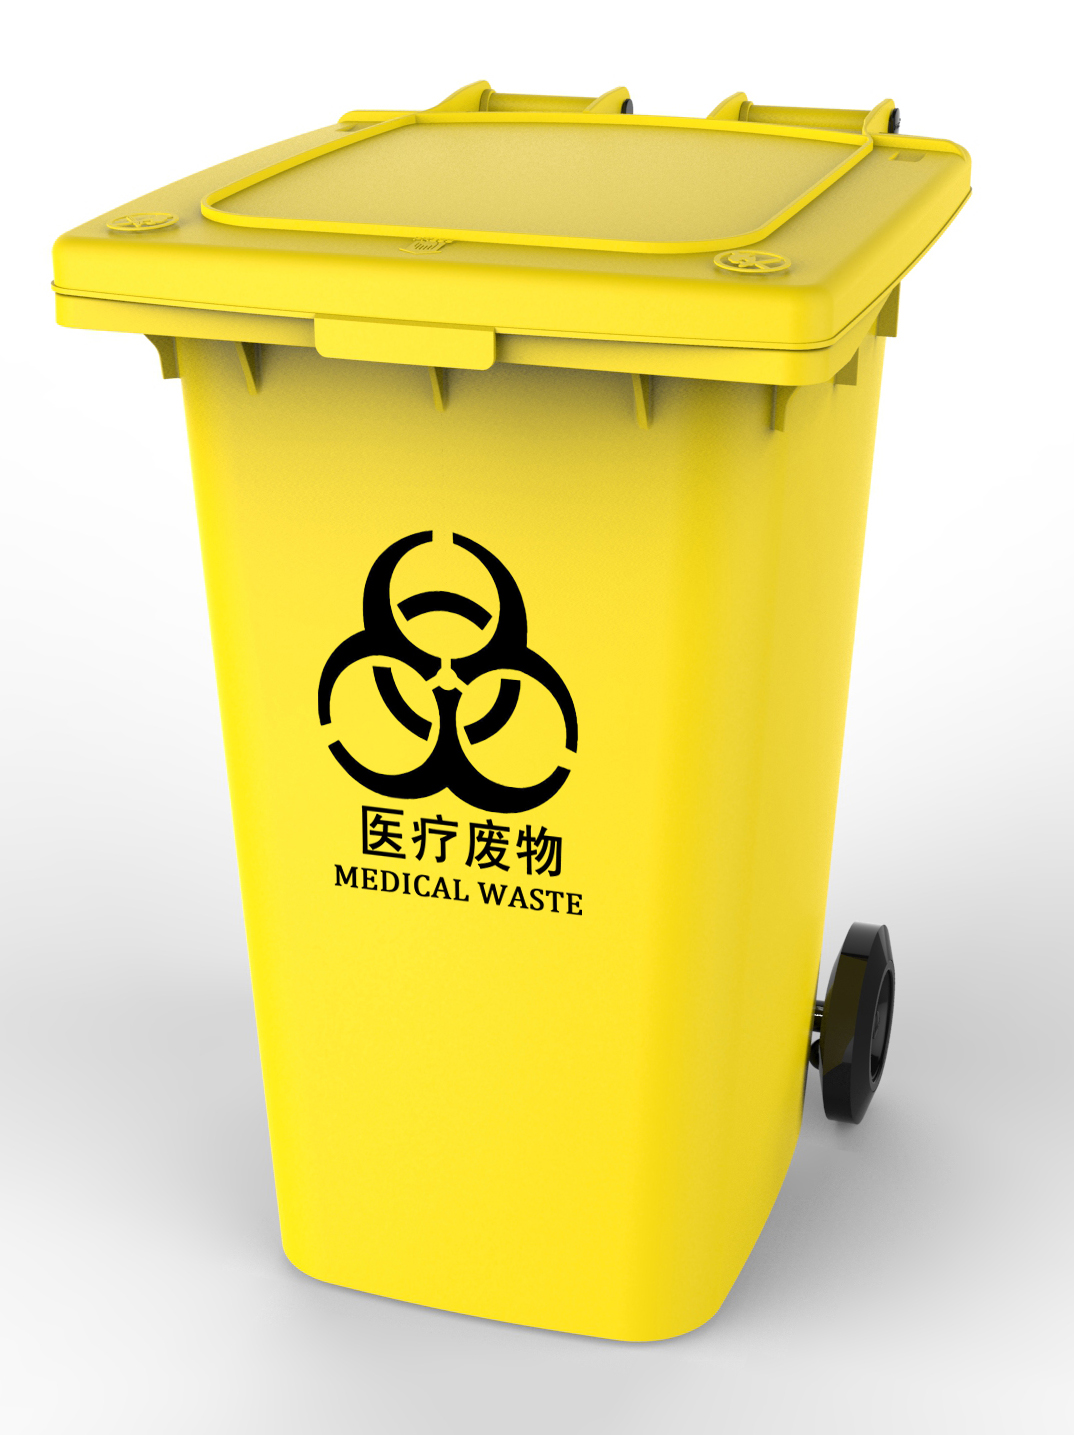 Plastic Dustbin 240L Recycling Garbage Cans